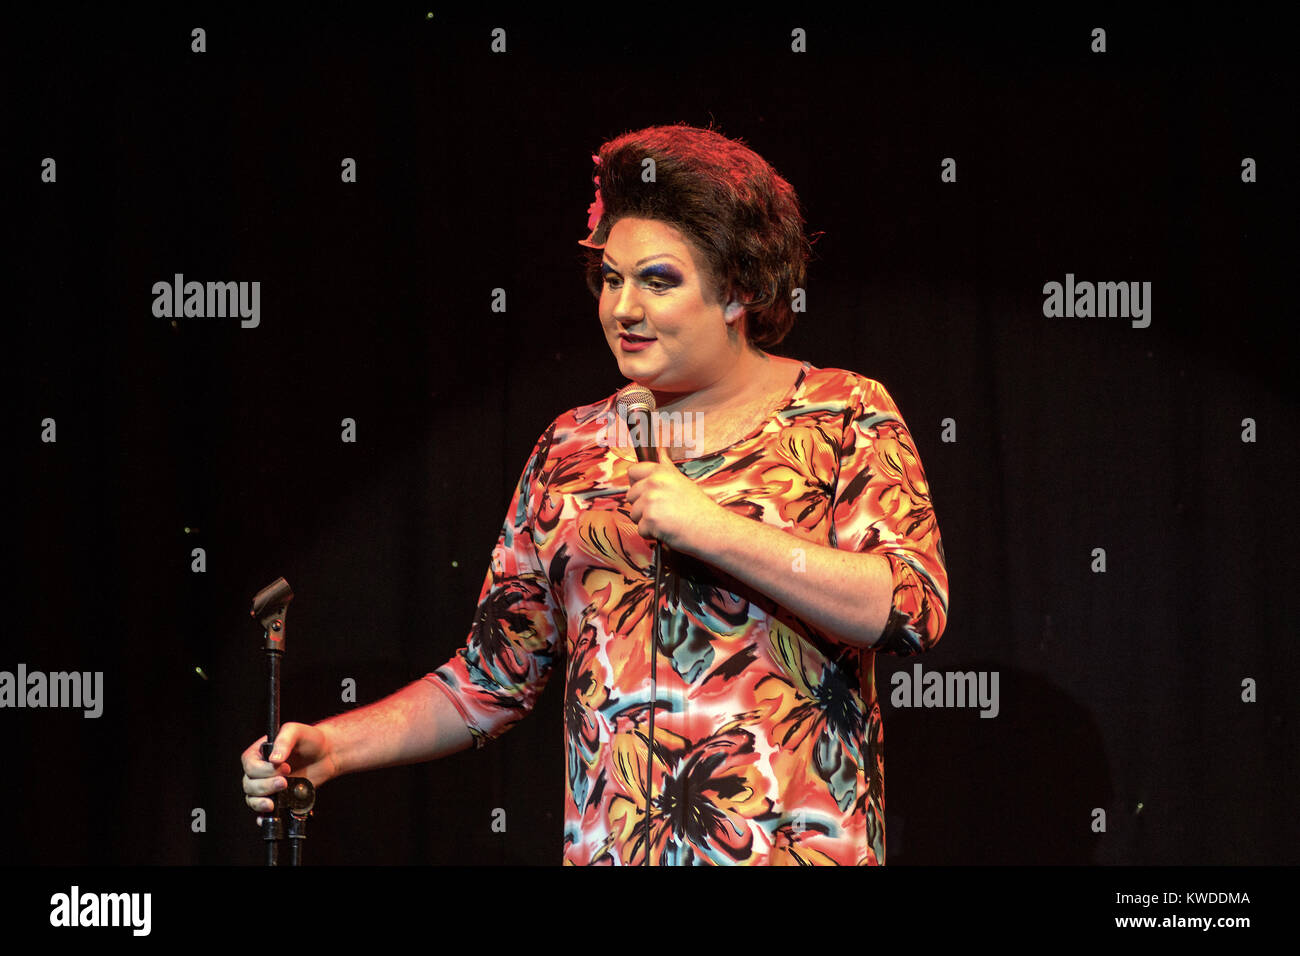 Drag queen comedian, Nancy Clench, performing at The Voodoo Rooms on 8th August, 2014, during the Edinburgh Festival Fringe, Edinburgh, Scotland Stock Photo